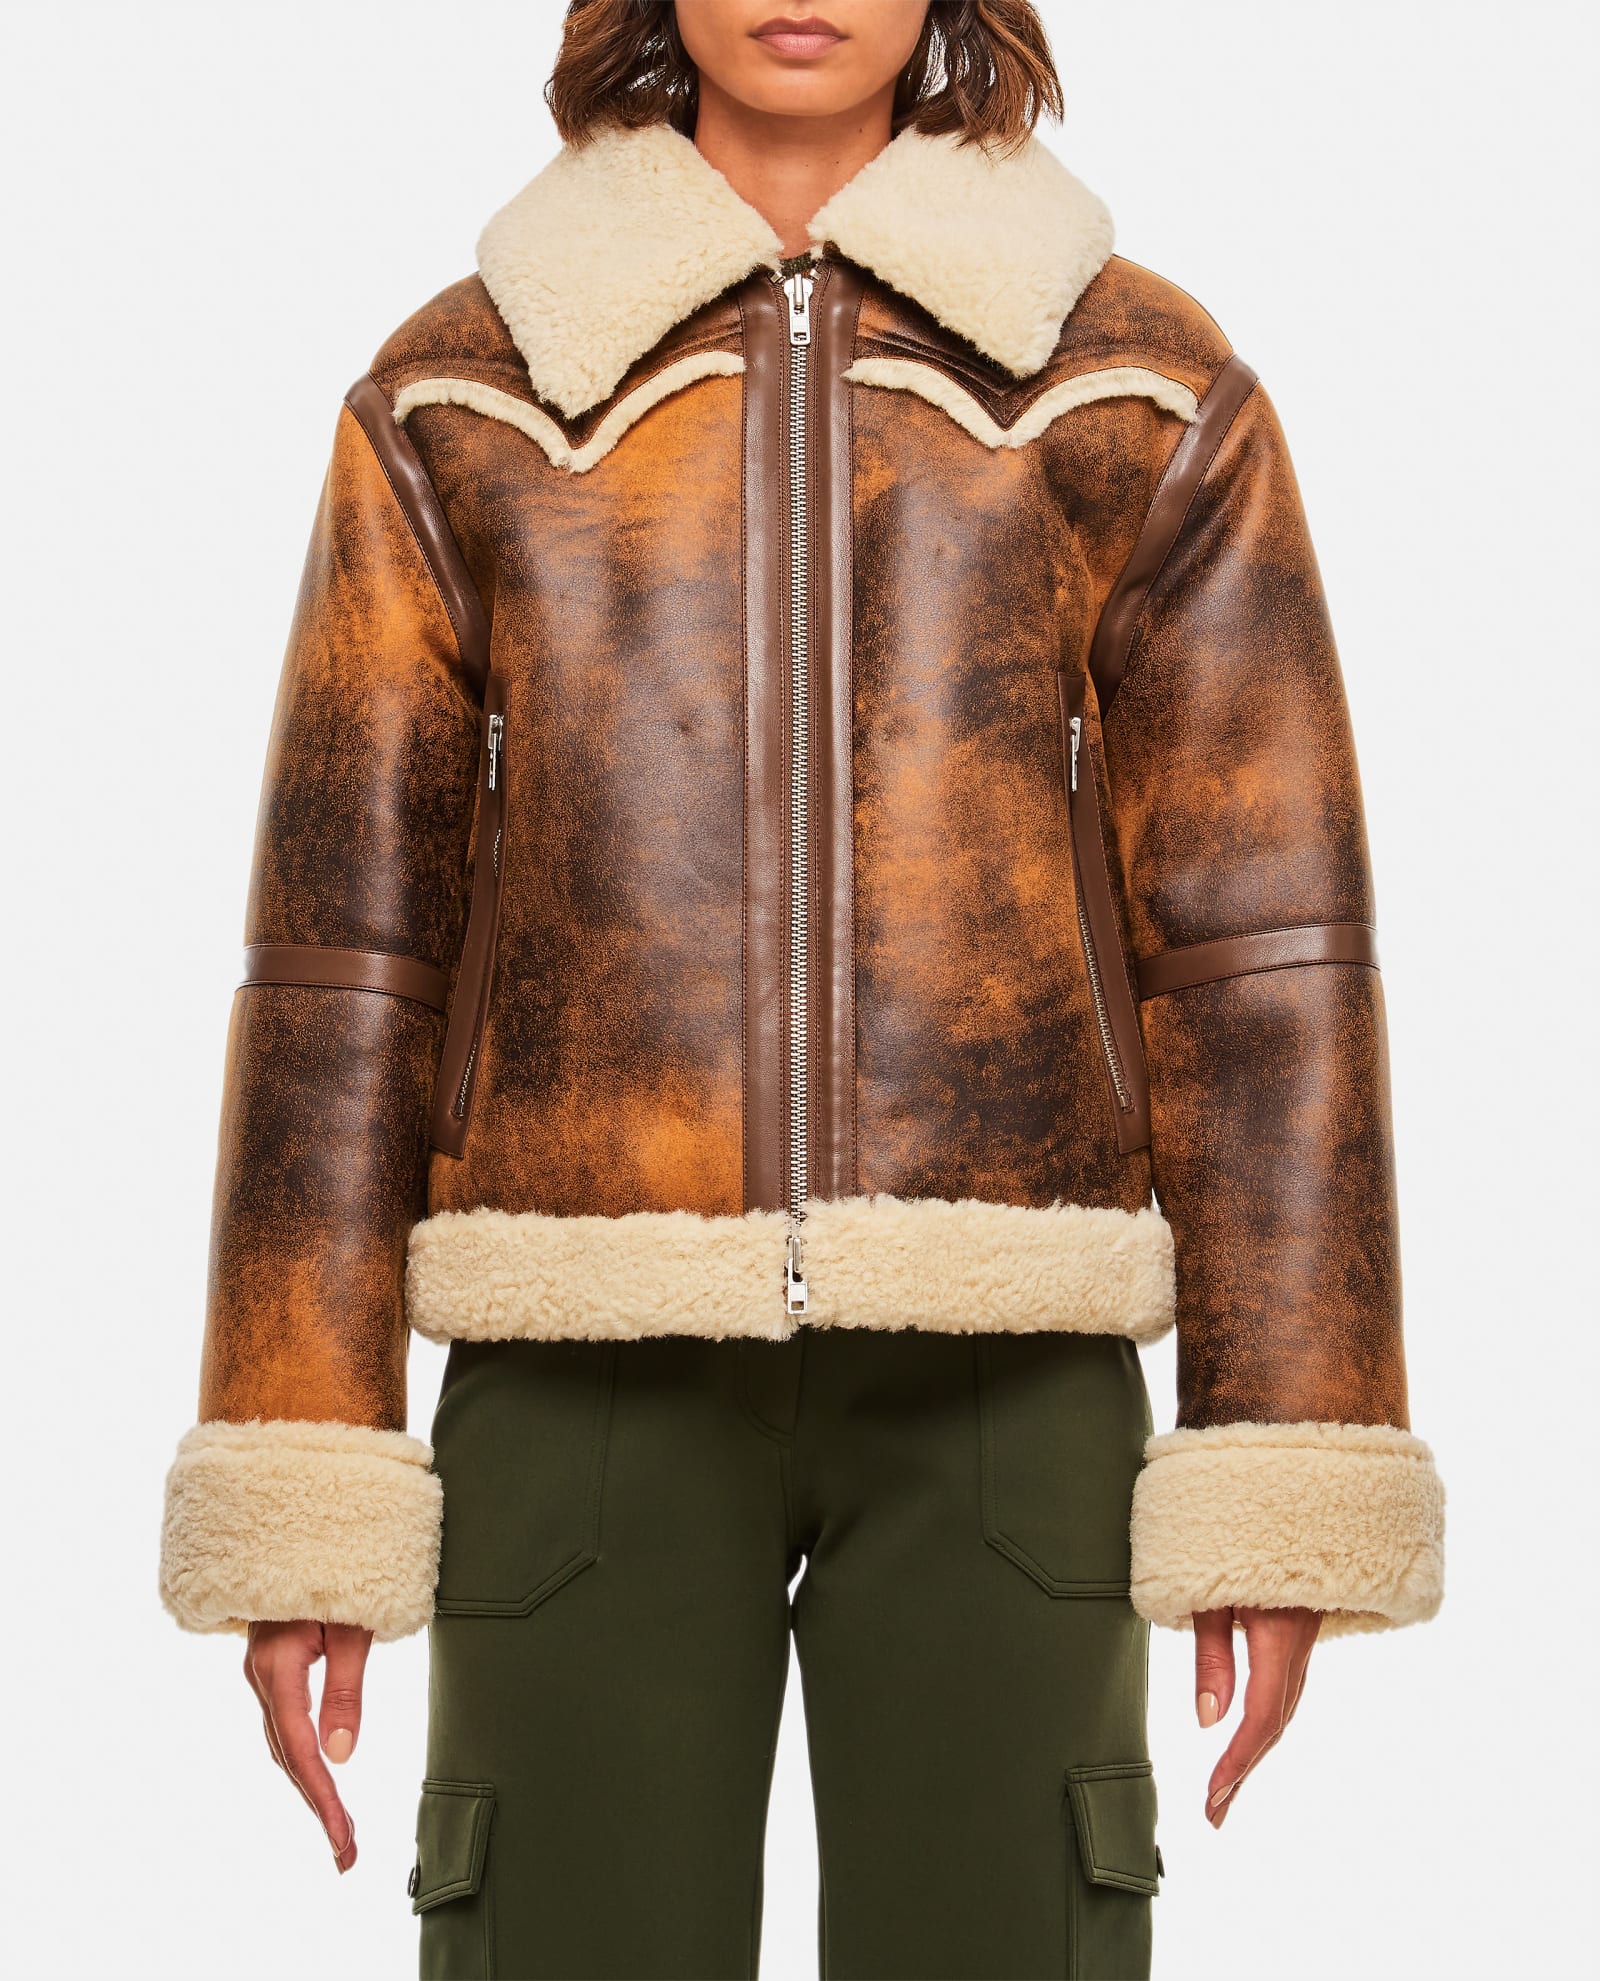 STAND STUDIO LESSIE FAUX SHEARLING JACKET